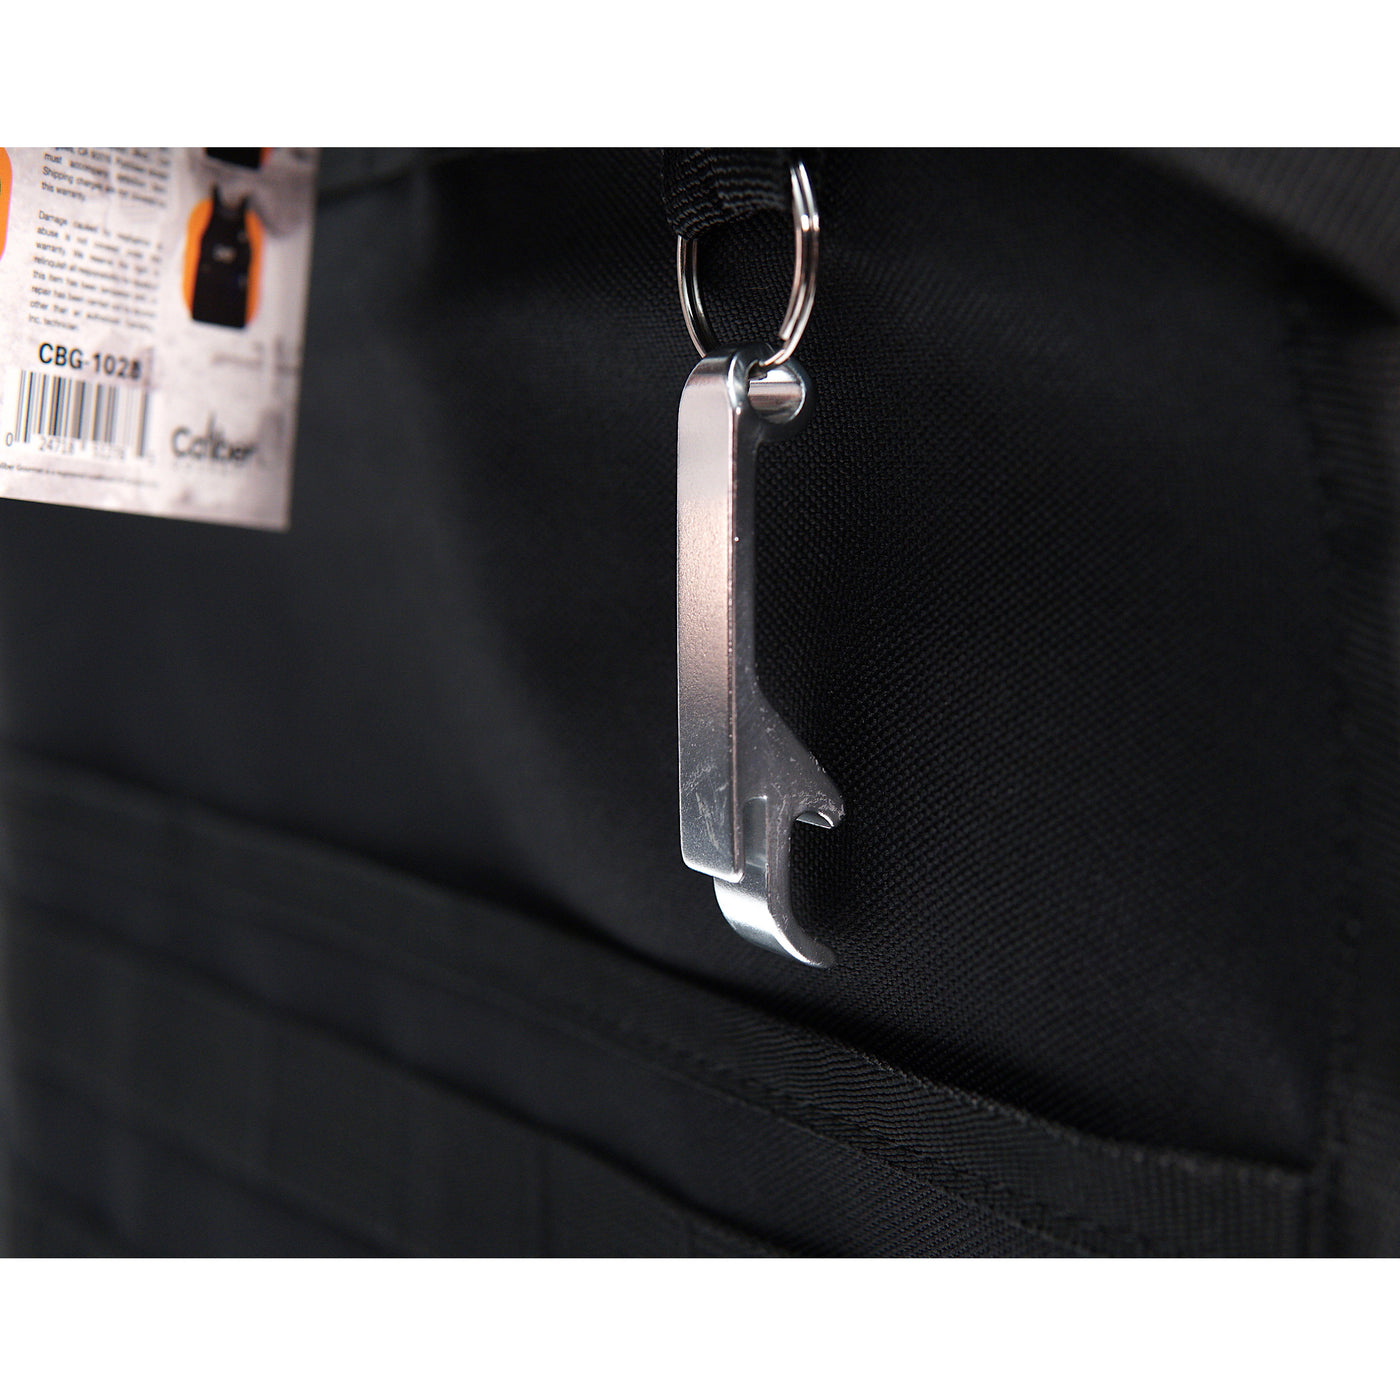 TACTICAL BBQ APRON WITH CARABINER AND BOTTLE OPENER